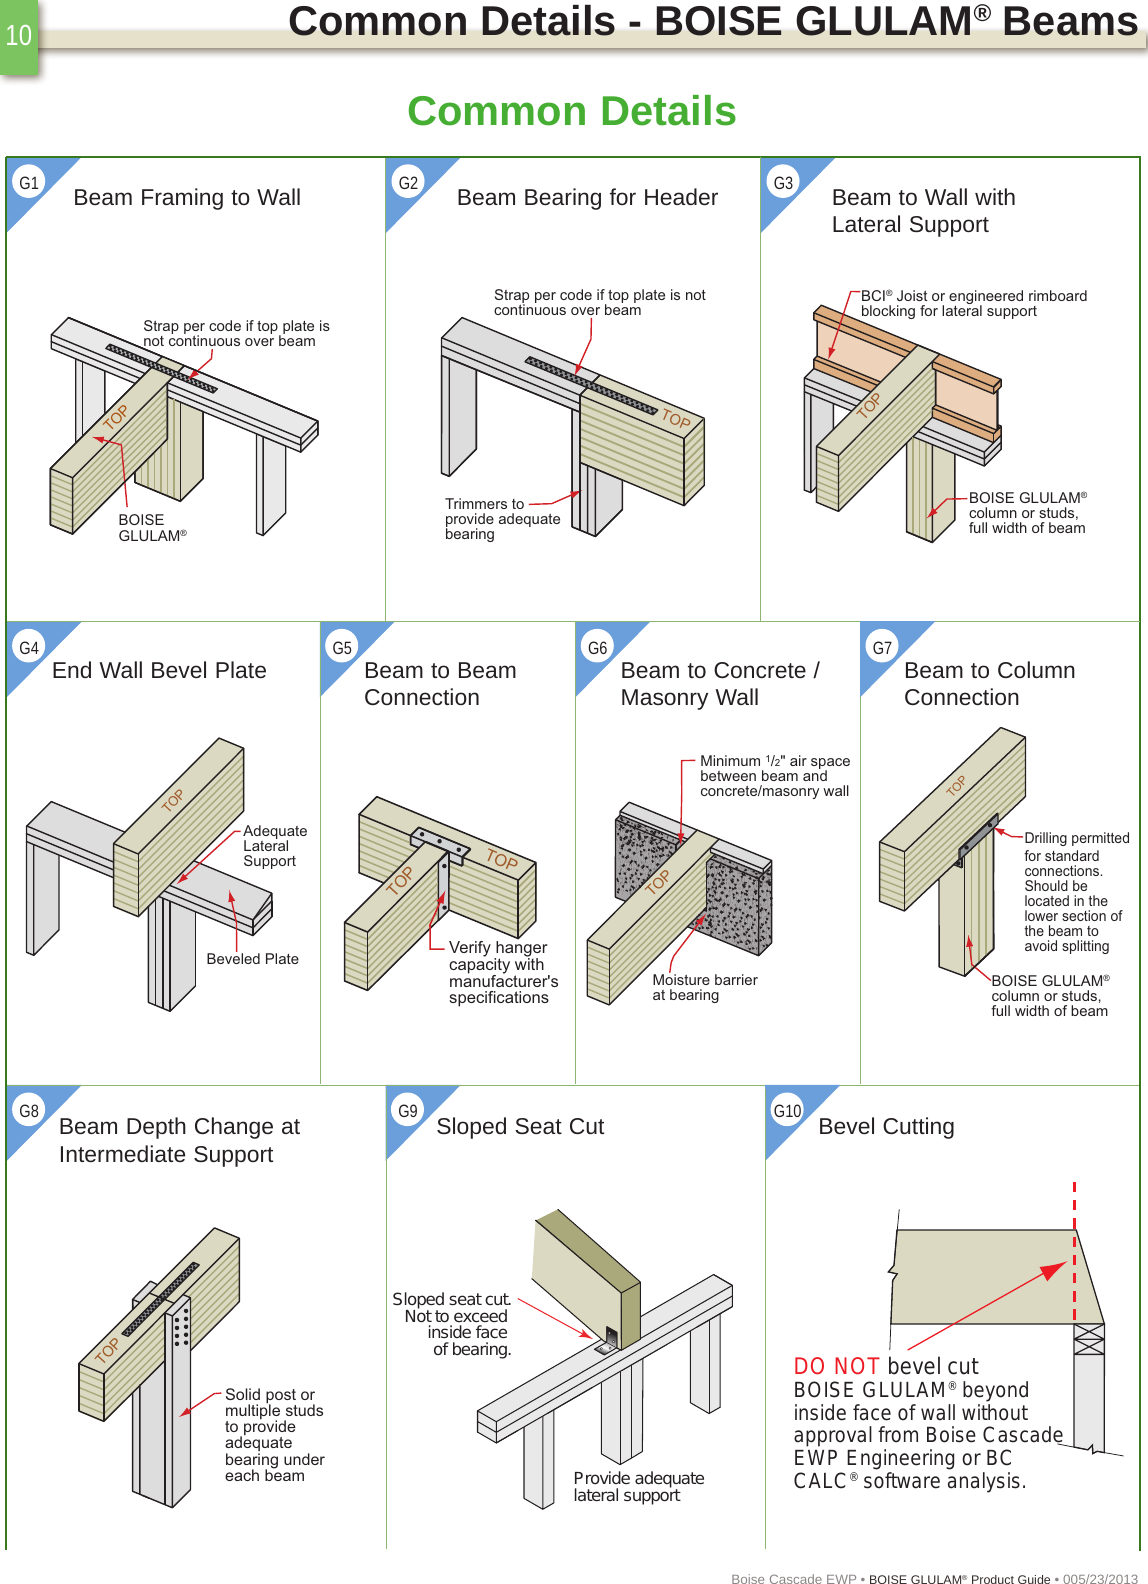 Page 10 of 12 - Boise Glulam Product Guide